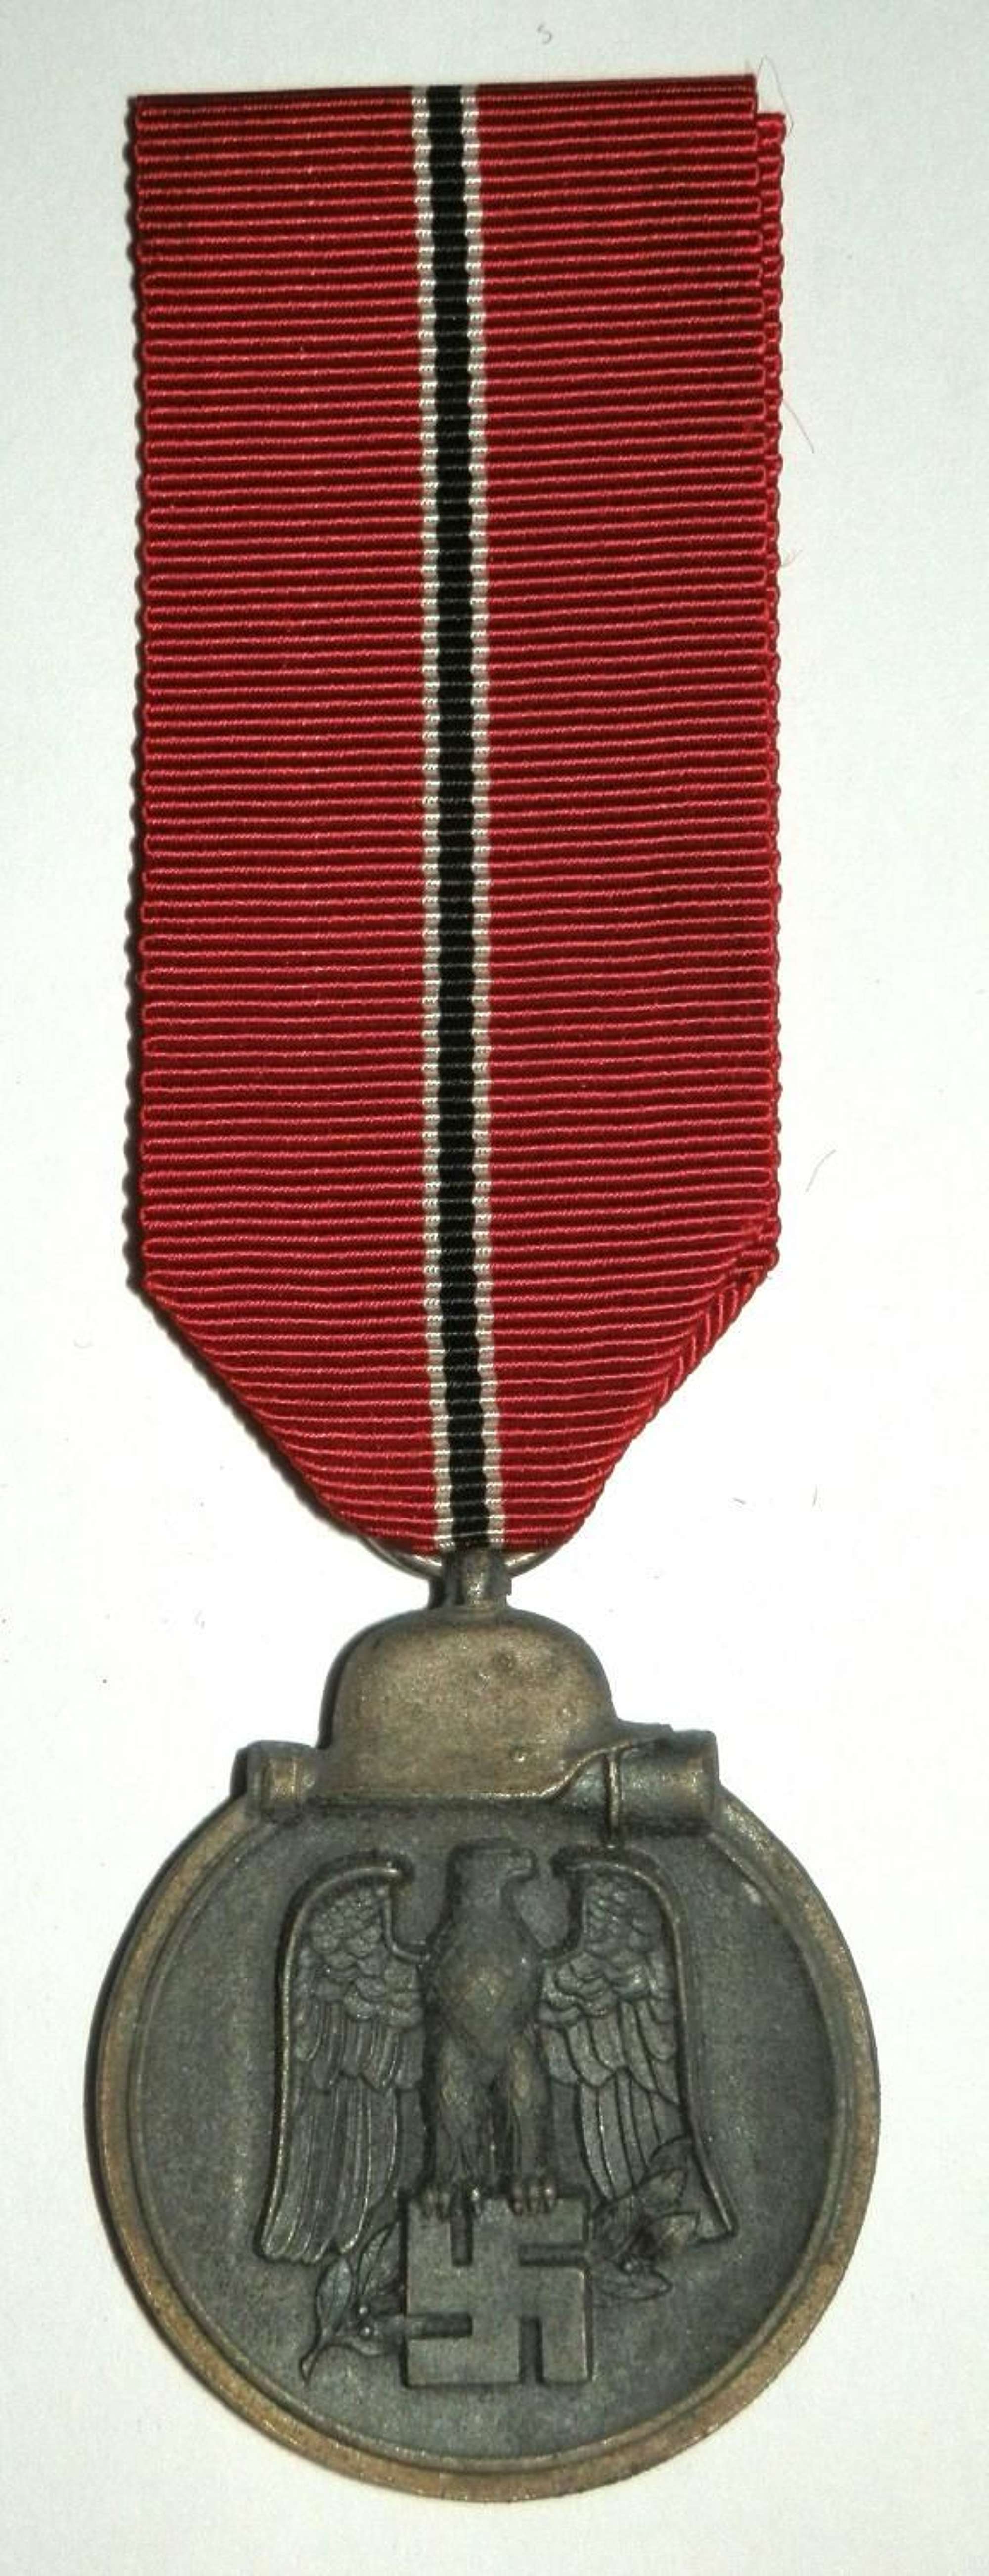 Winter Campaign Medal Russia 1941-42. (Eastern Front Medal) Marked 13